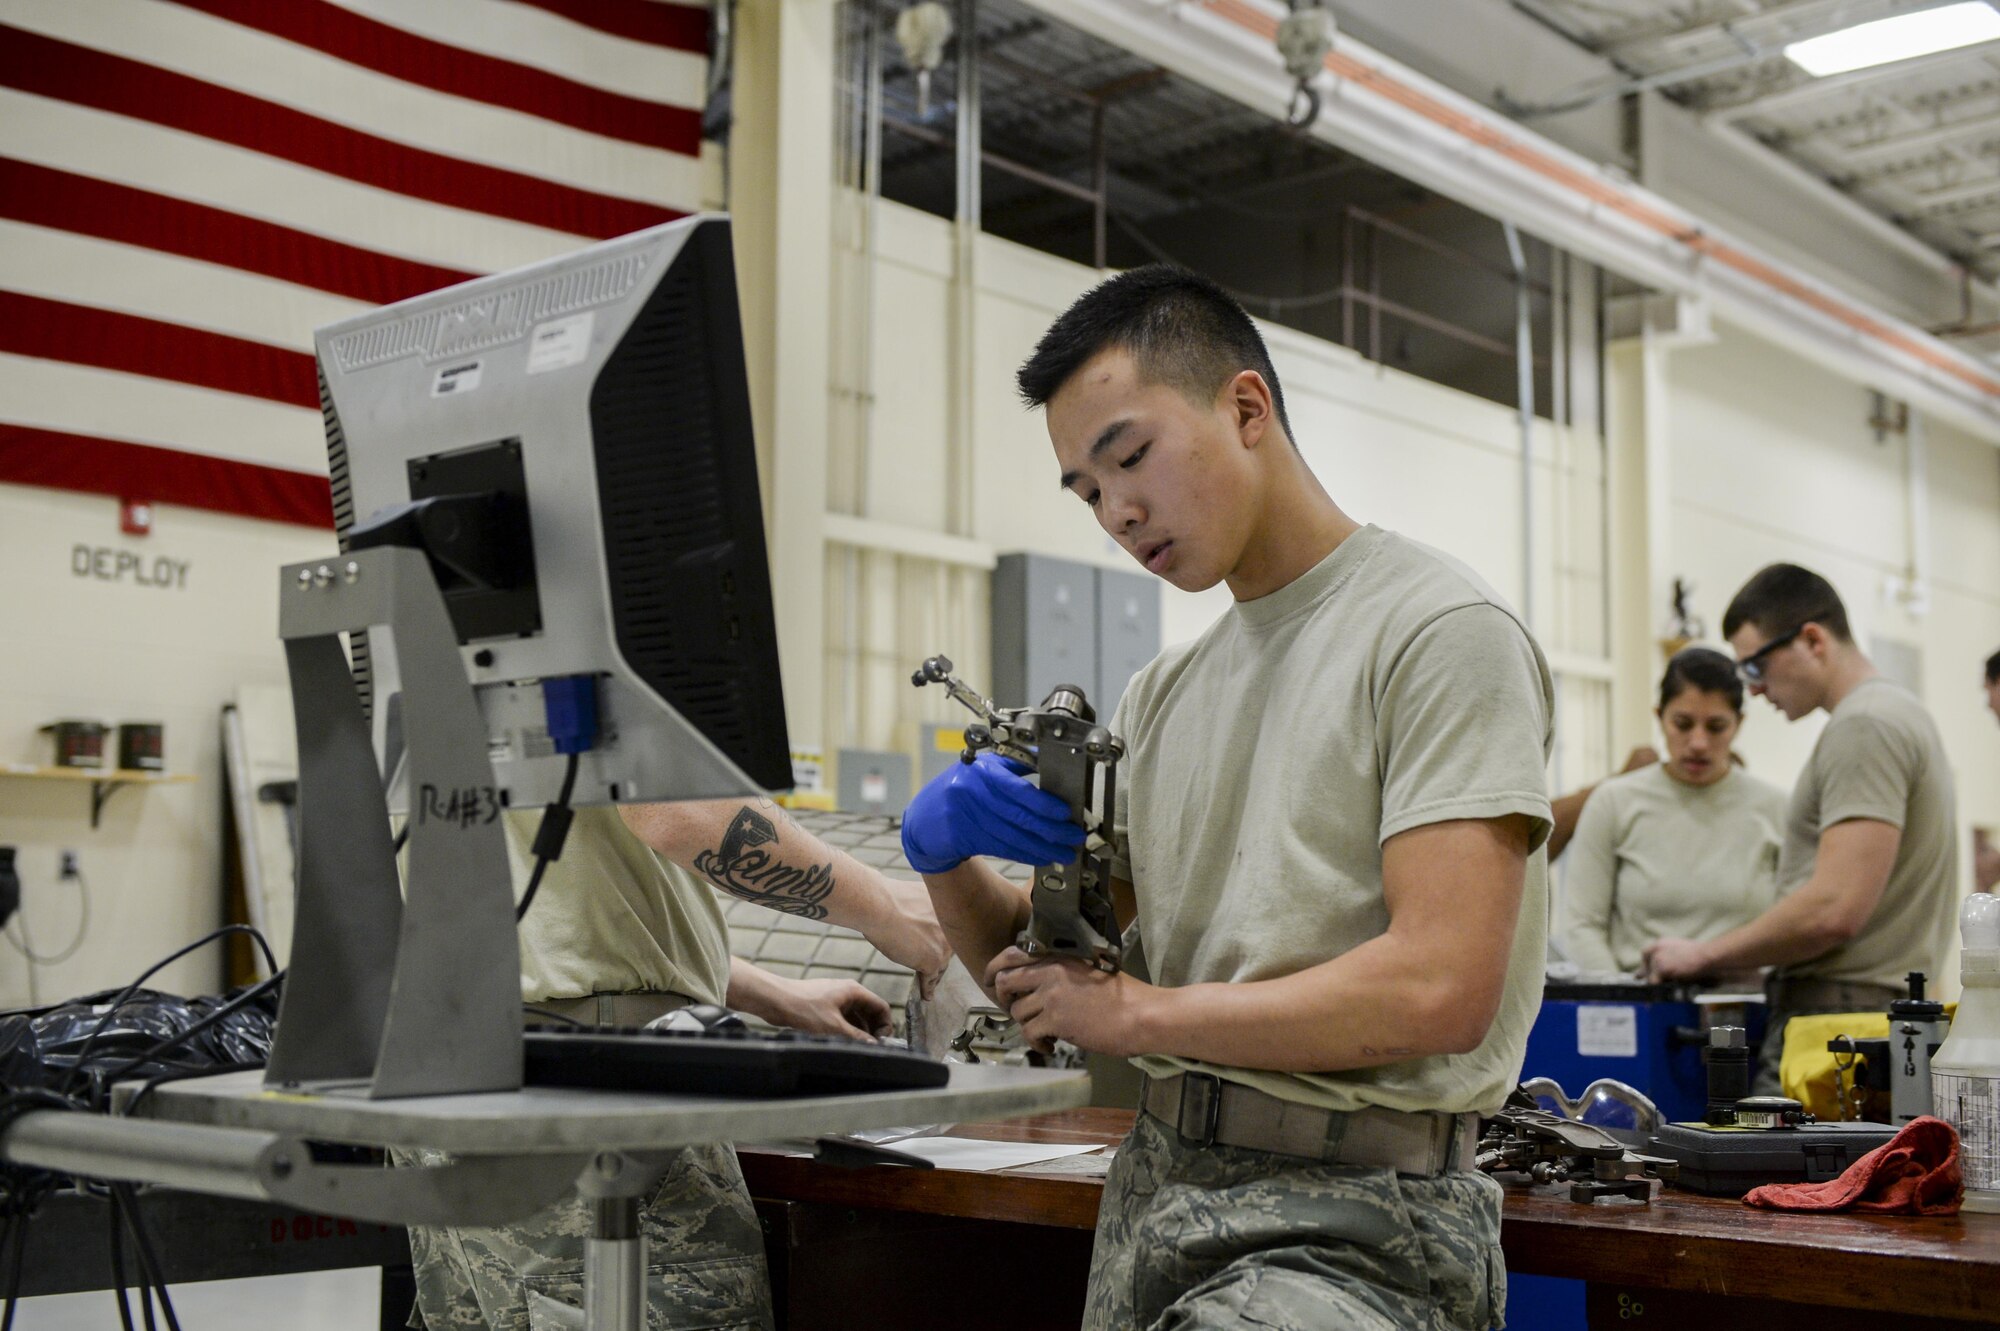 U.S. Air Force Airman 1st Class Brandon Trang, a 354th Maintenance Squadron aerospace propulsion apprentice, inspects parts for damage Oct. 8, 2015, during an engine rebuild in the Engine Shop at Eielson Air Force Base, Alaska. Trang ensured components were safe for continued use and tracked the condition of each part. (U.S. Air Force photo by Senior Airman Peter Reft/Released)  